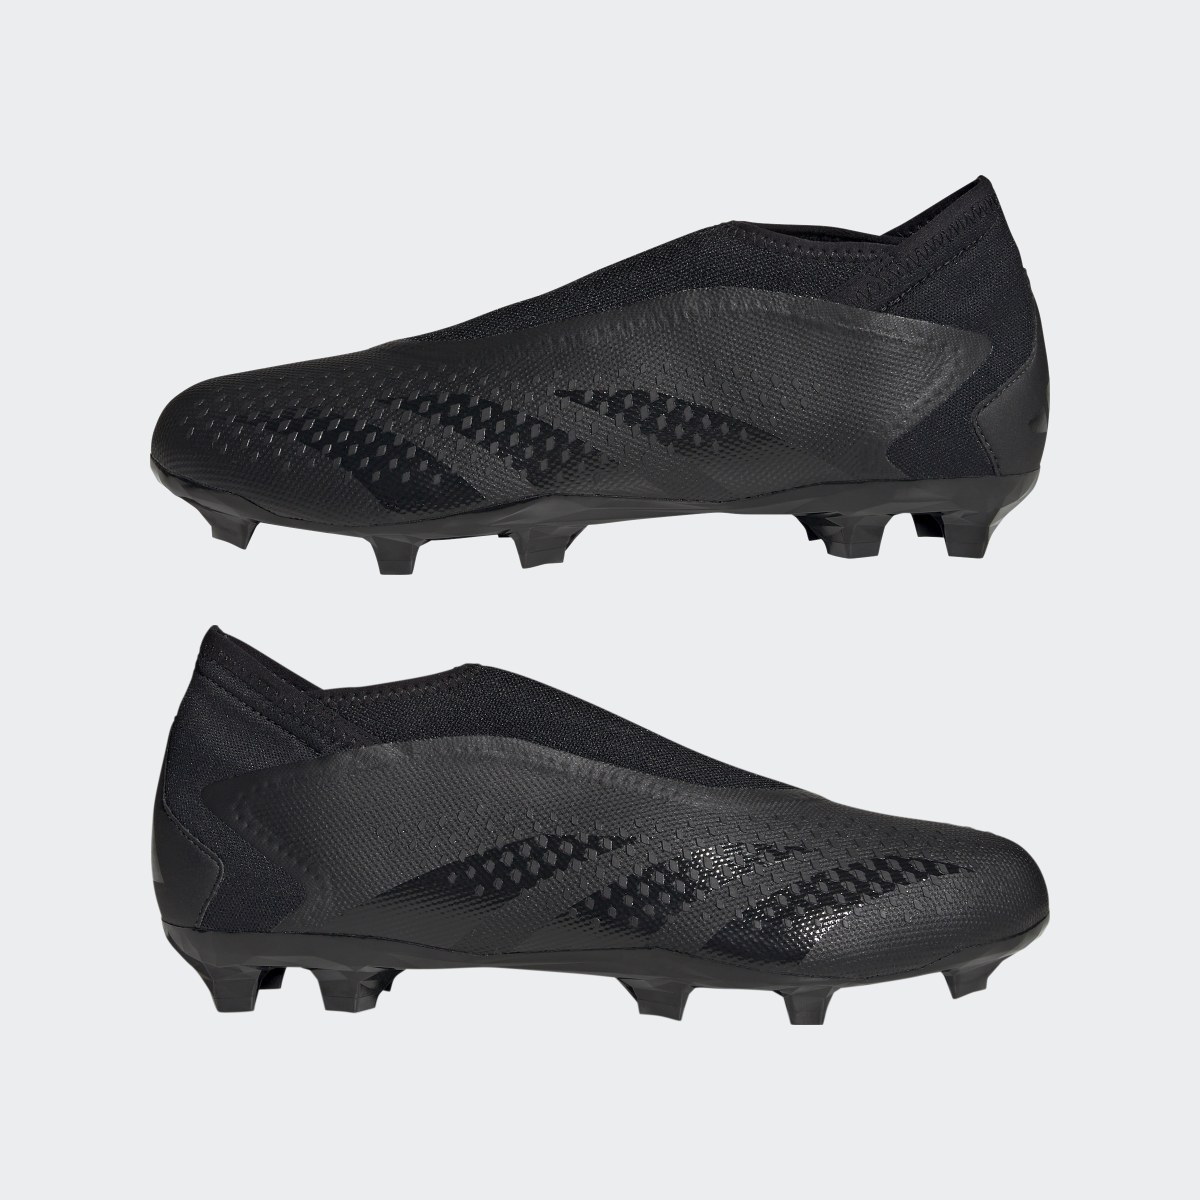 Adidas Predator Accuracy.3 Laceless Firm Ground Boots. 8